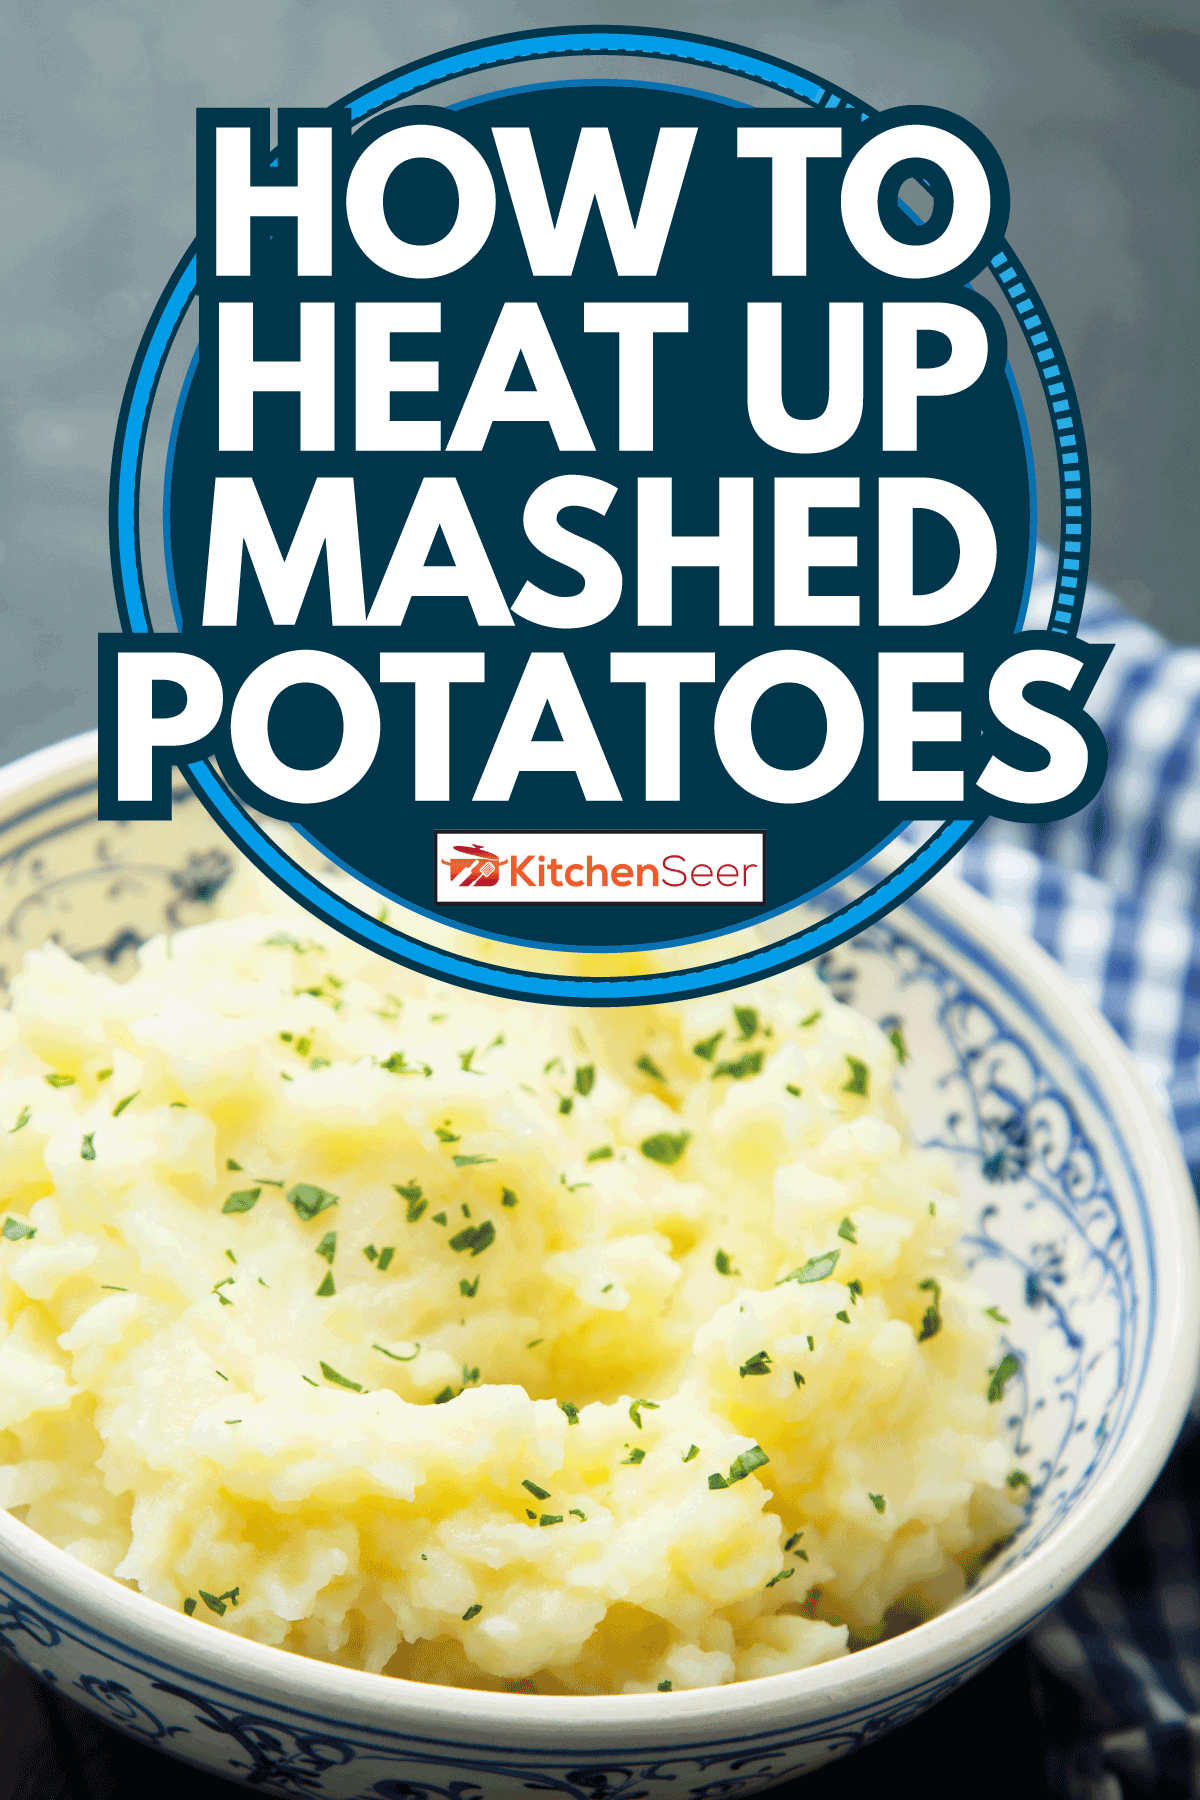 Homemade potato mash in a ceramic bowl with tablecloth on a wooden table. How To Heat Up Mashed Potatoes